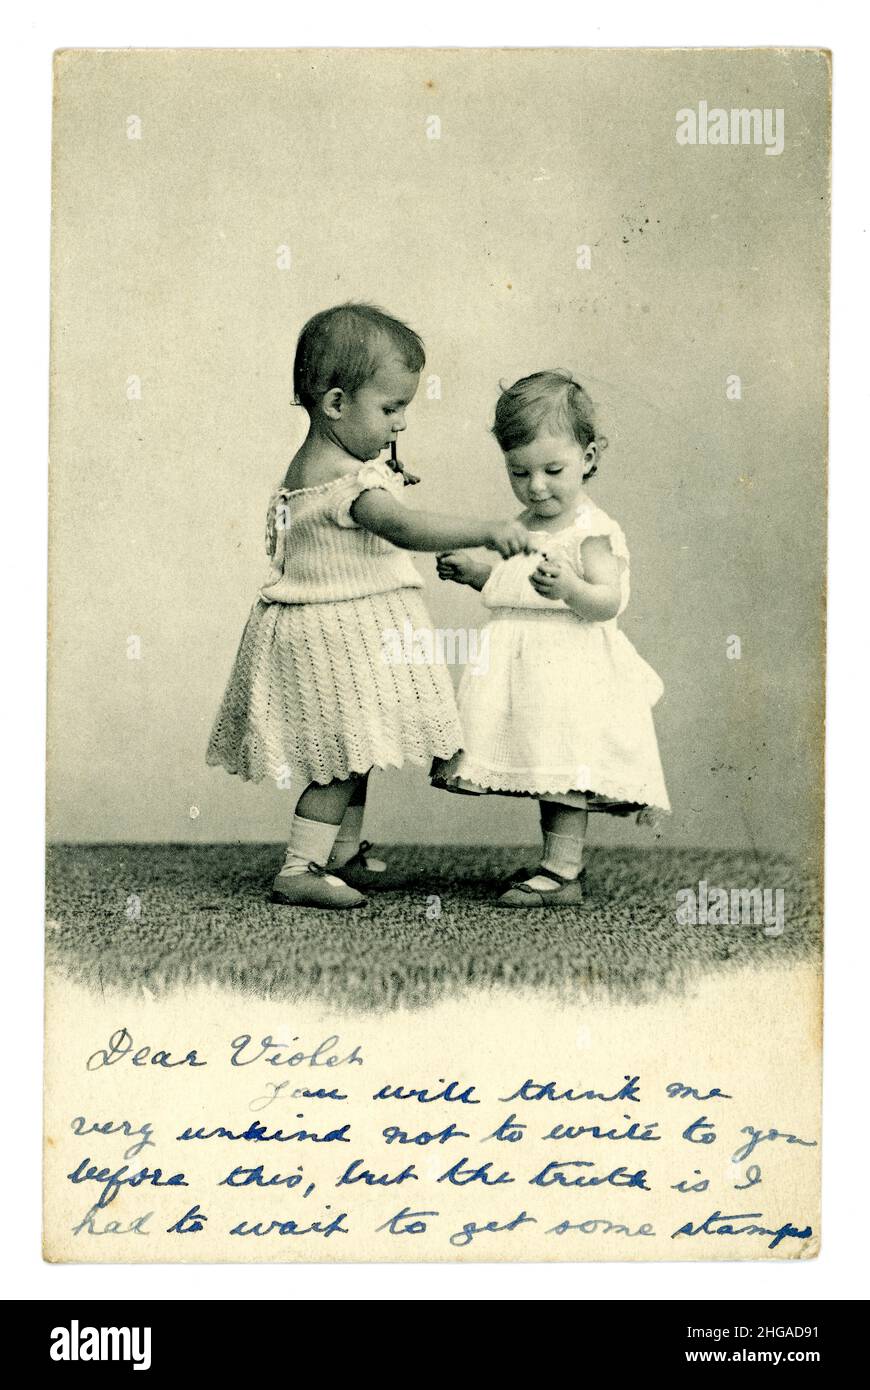 Edwardian greetings postcard depicting two cute children / toddlers holding hands, the baby on the left is probably a boy wearing a dress as was normal at this time, posted in 1904 from the U.K. Stock Photo